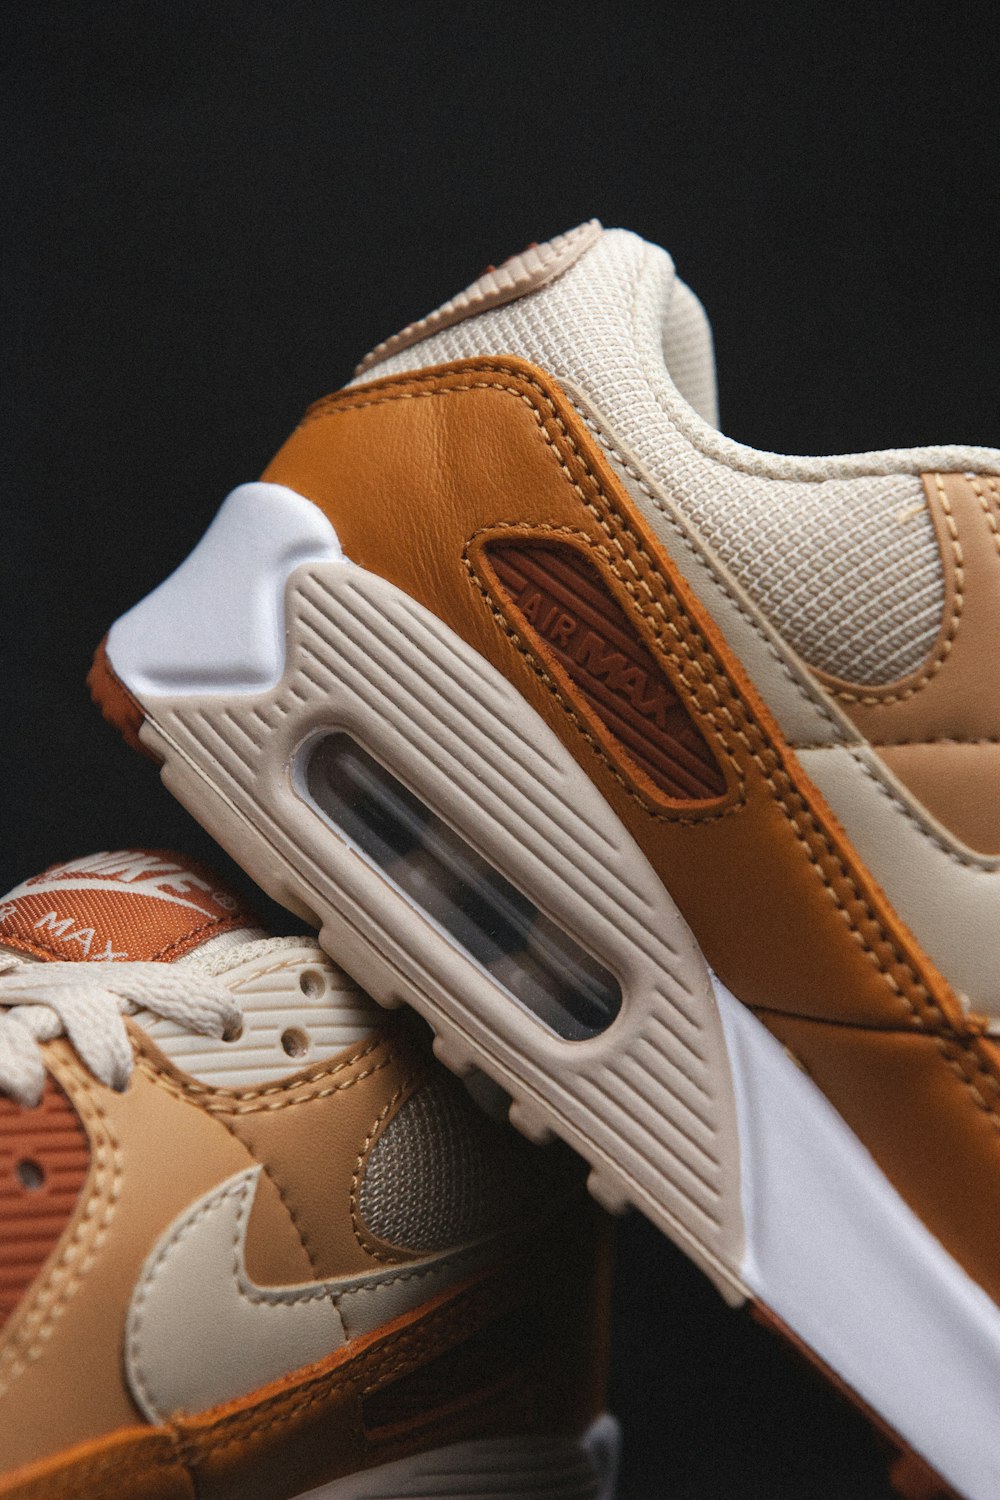 white and brown nike air max photo – Free Sneaker Image on Unsplash